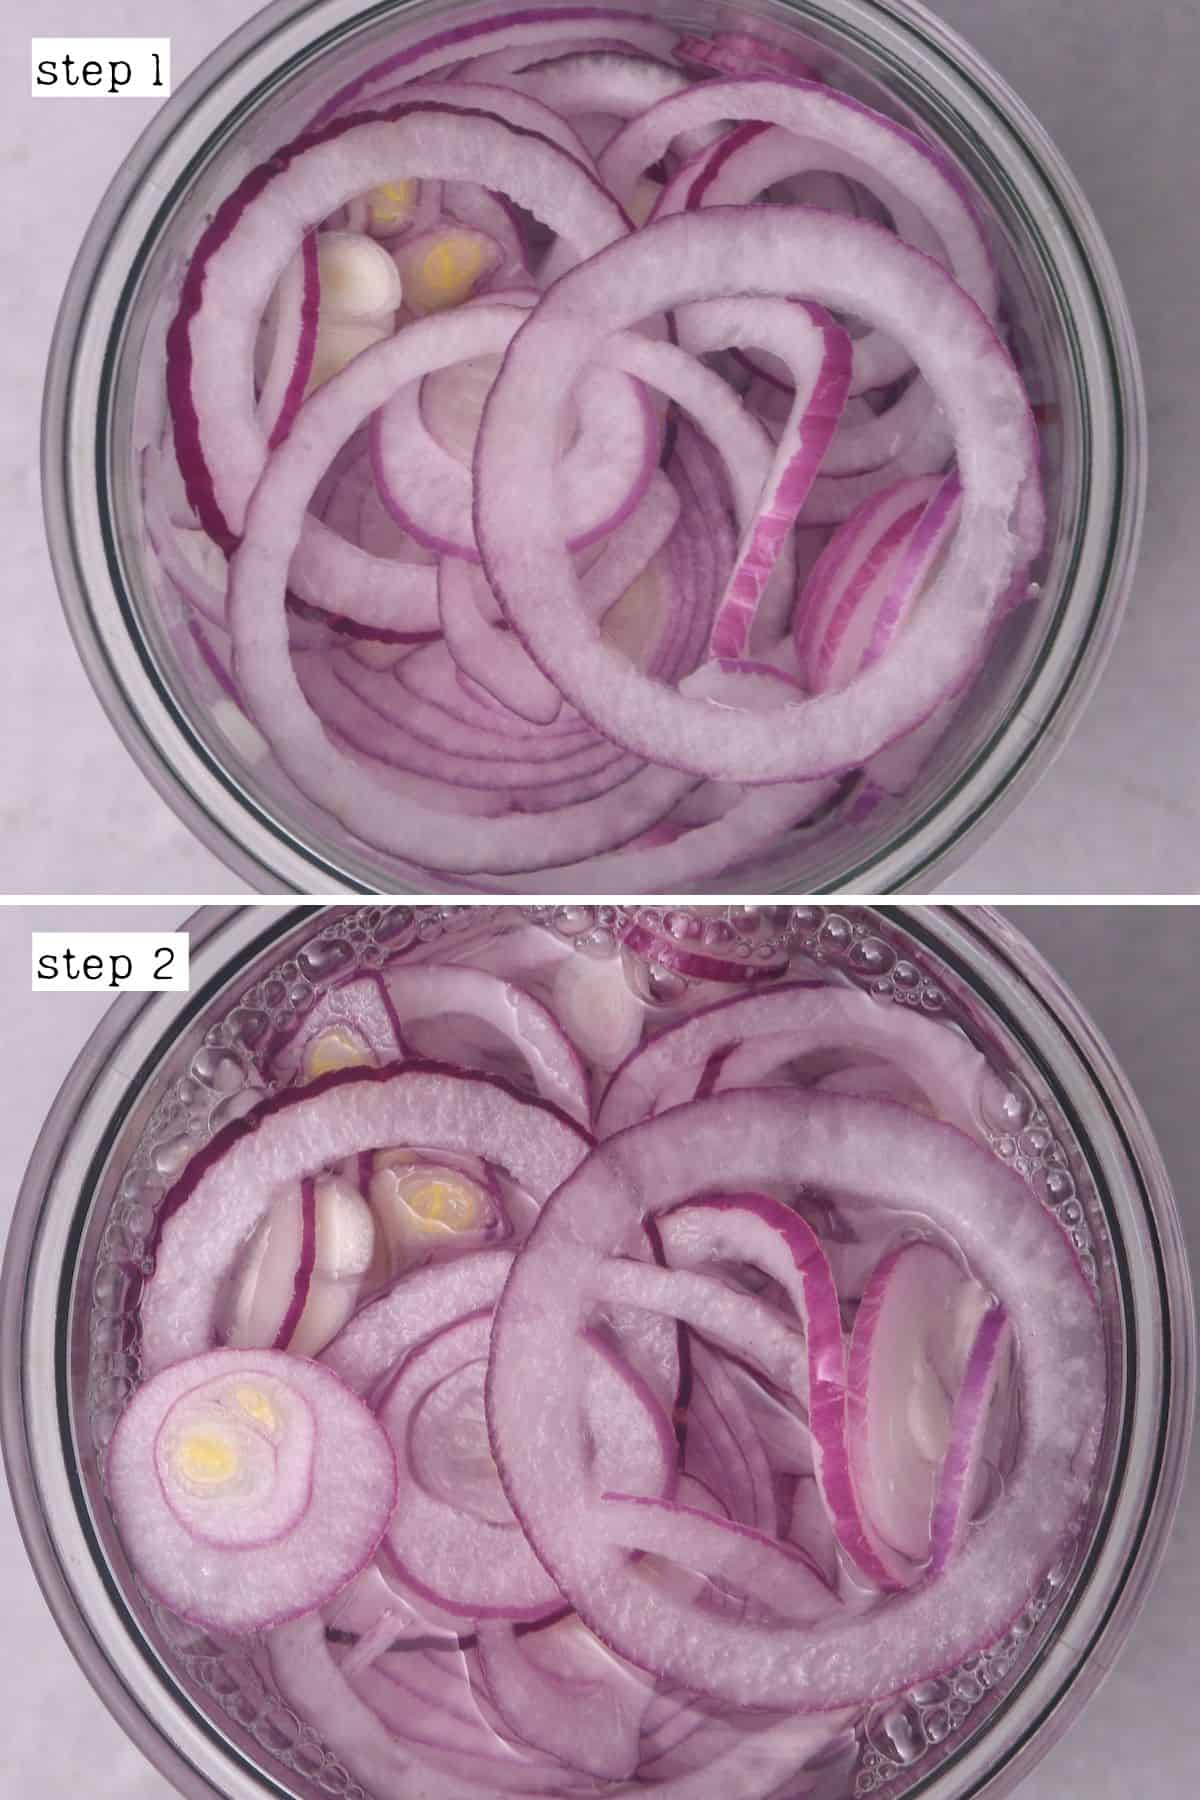 Steps for preparing pickled red onions